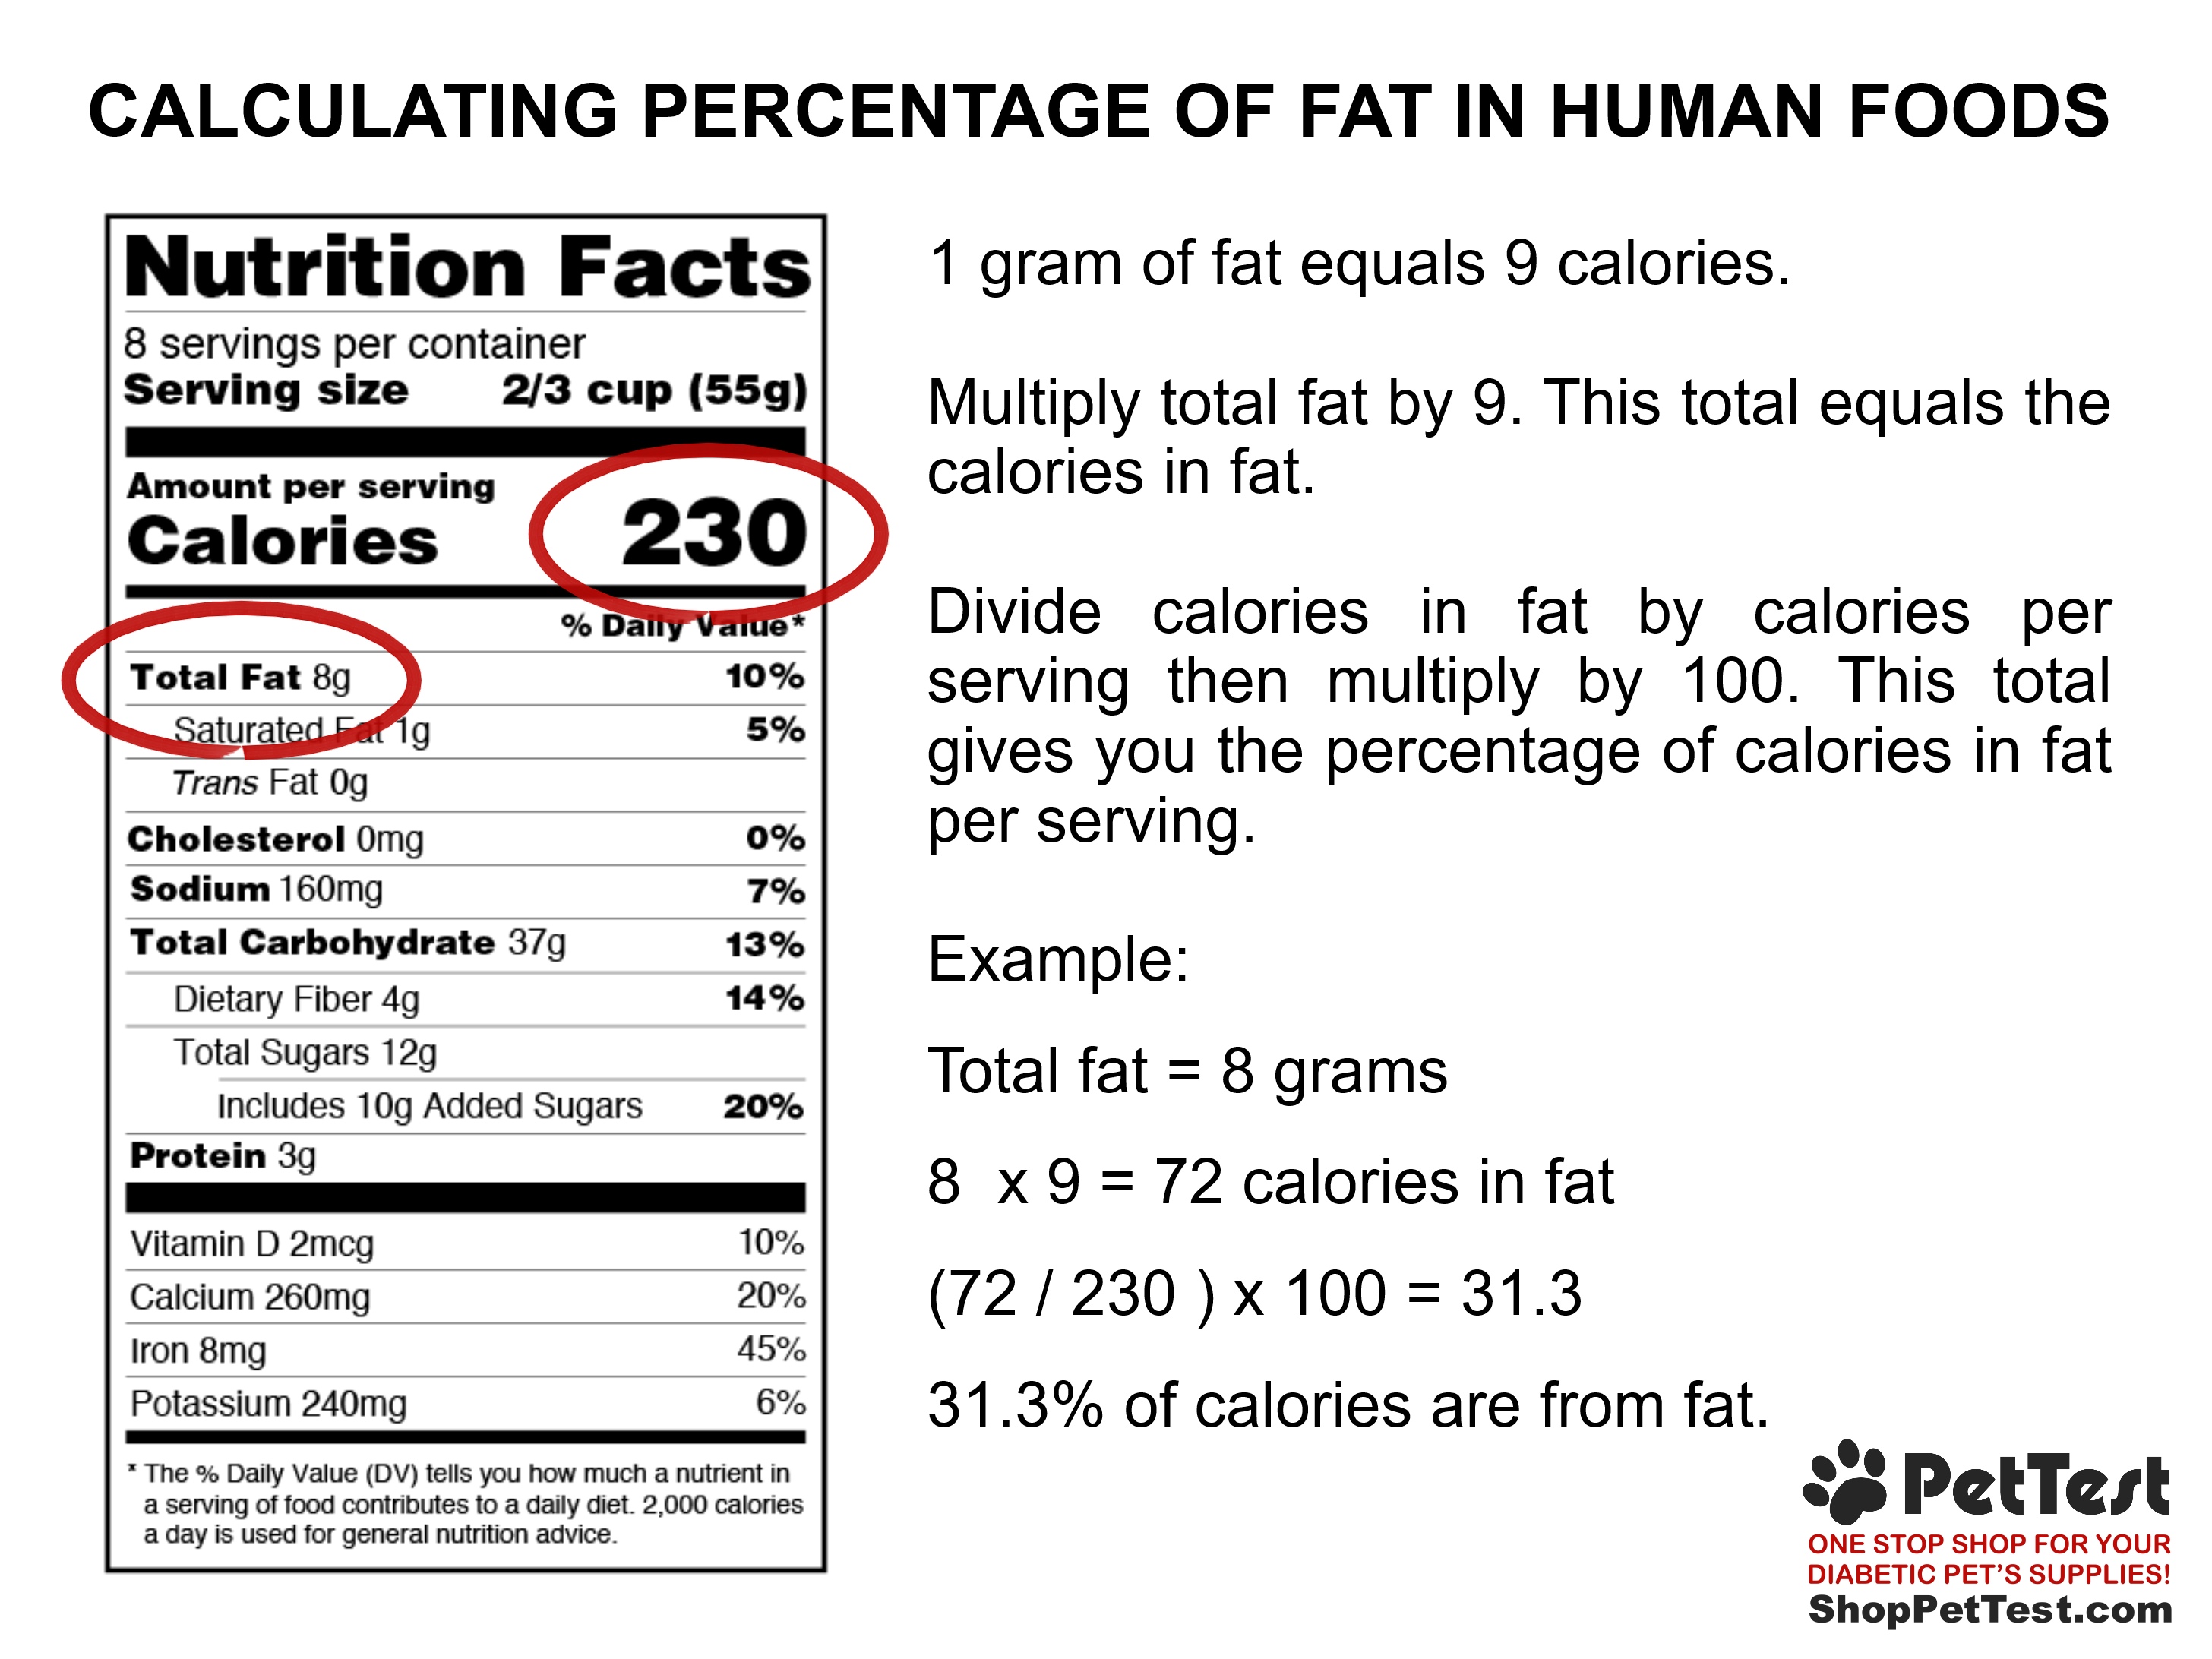 Calculating Fat in Human Foods graphic mtm